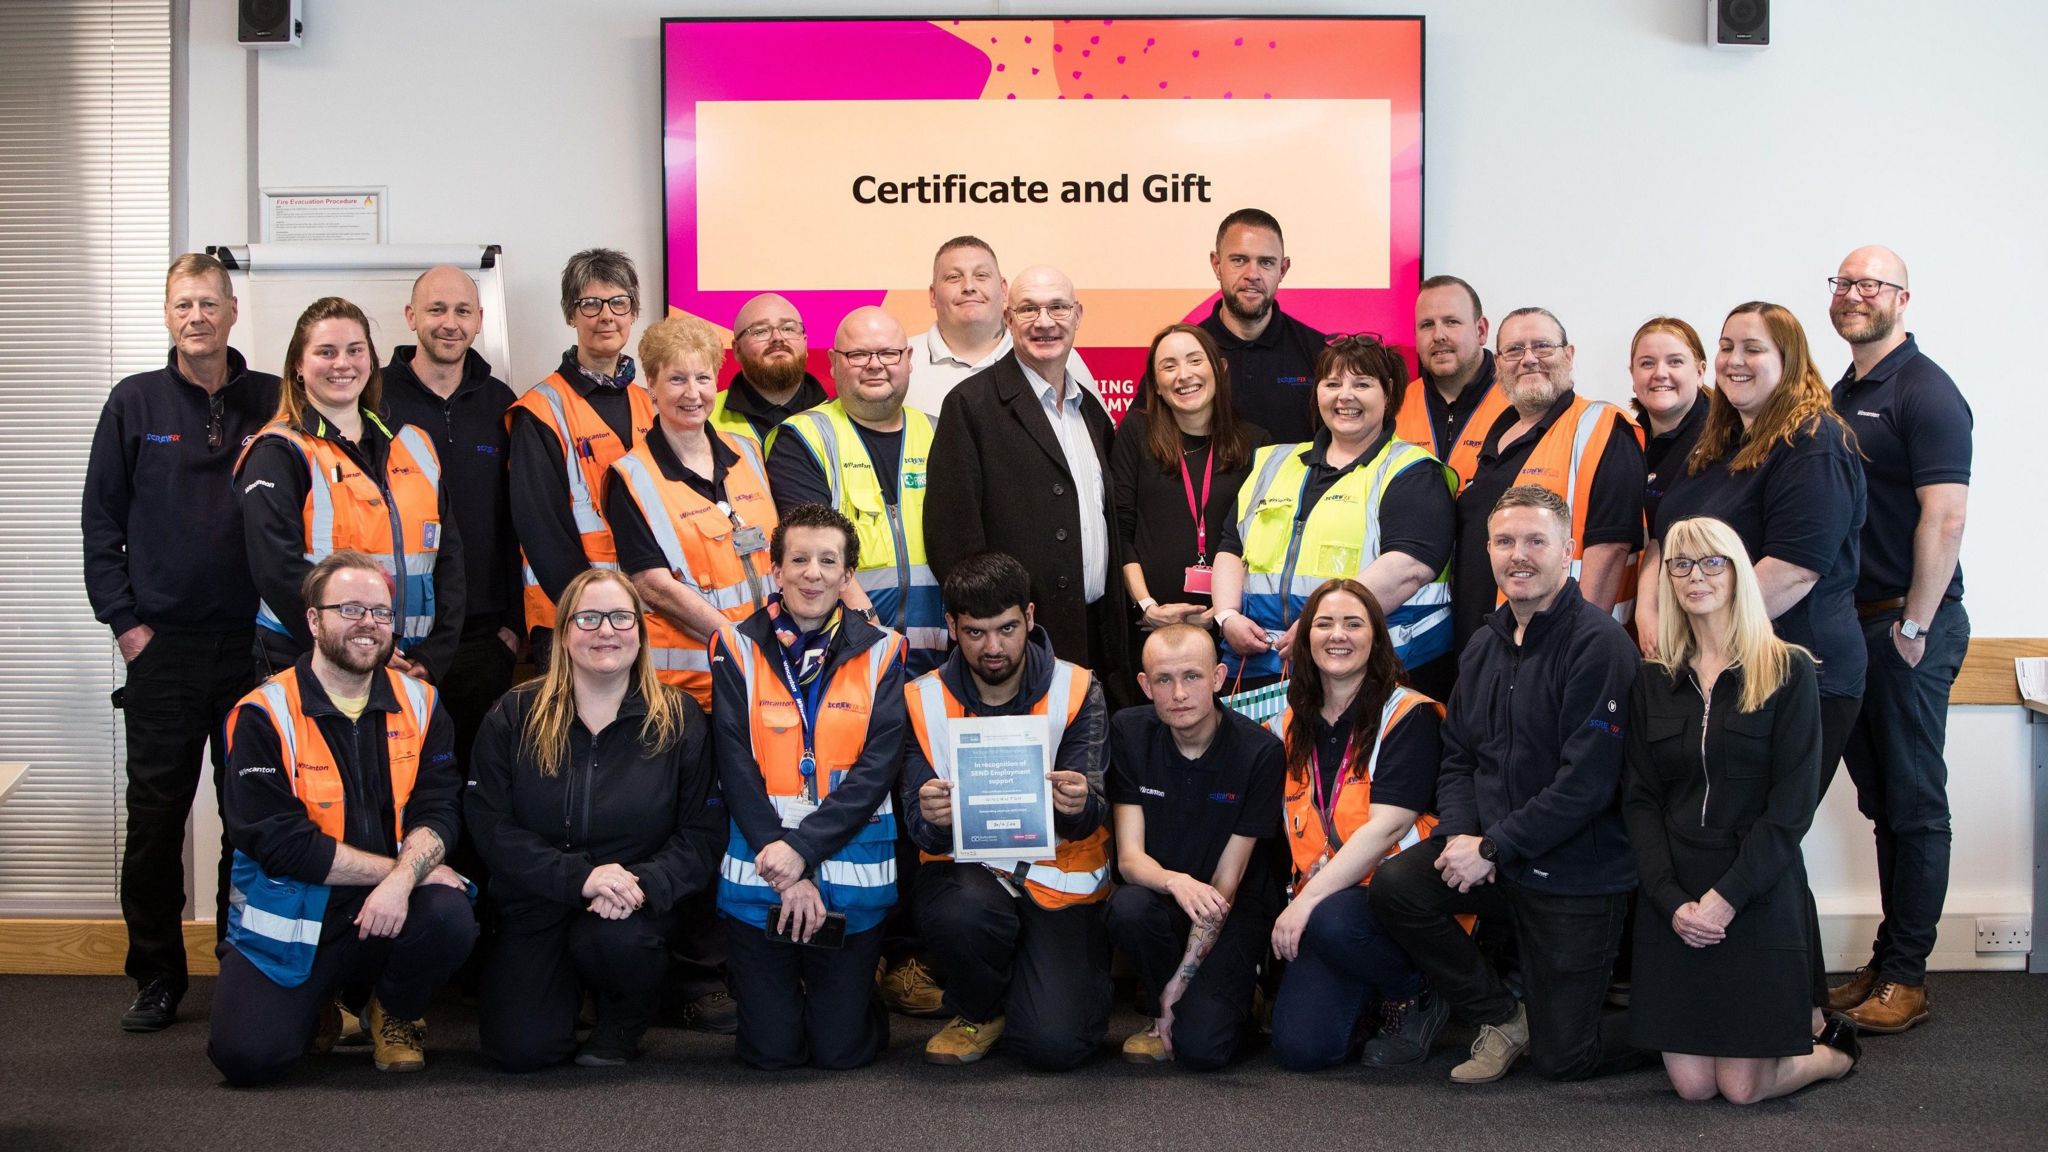 A team of twenty five employees are presented with a certificate.